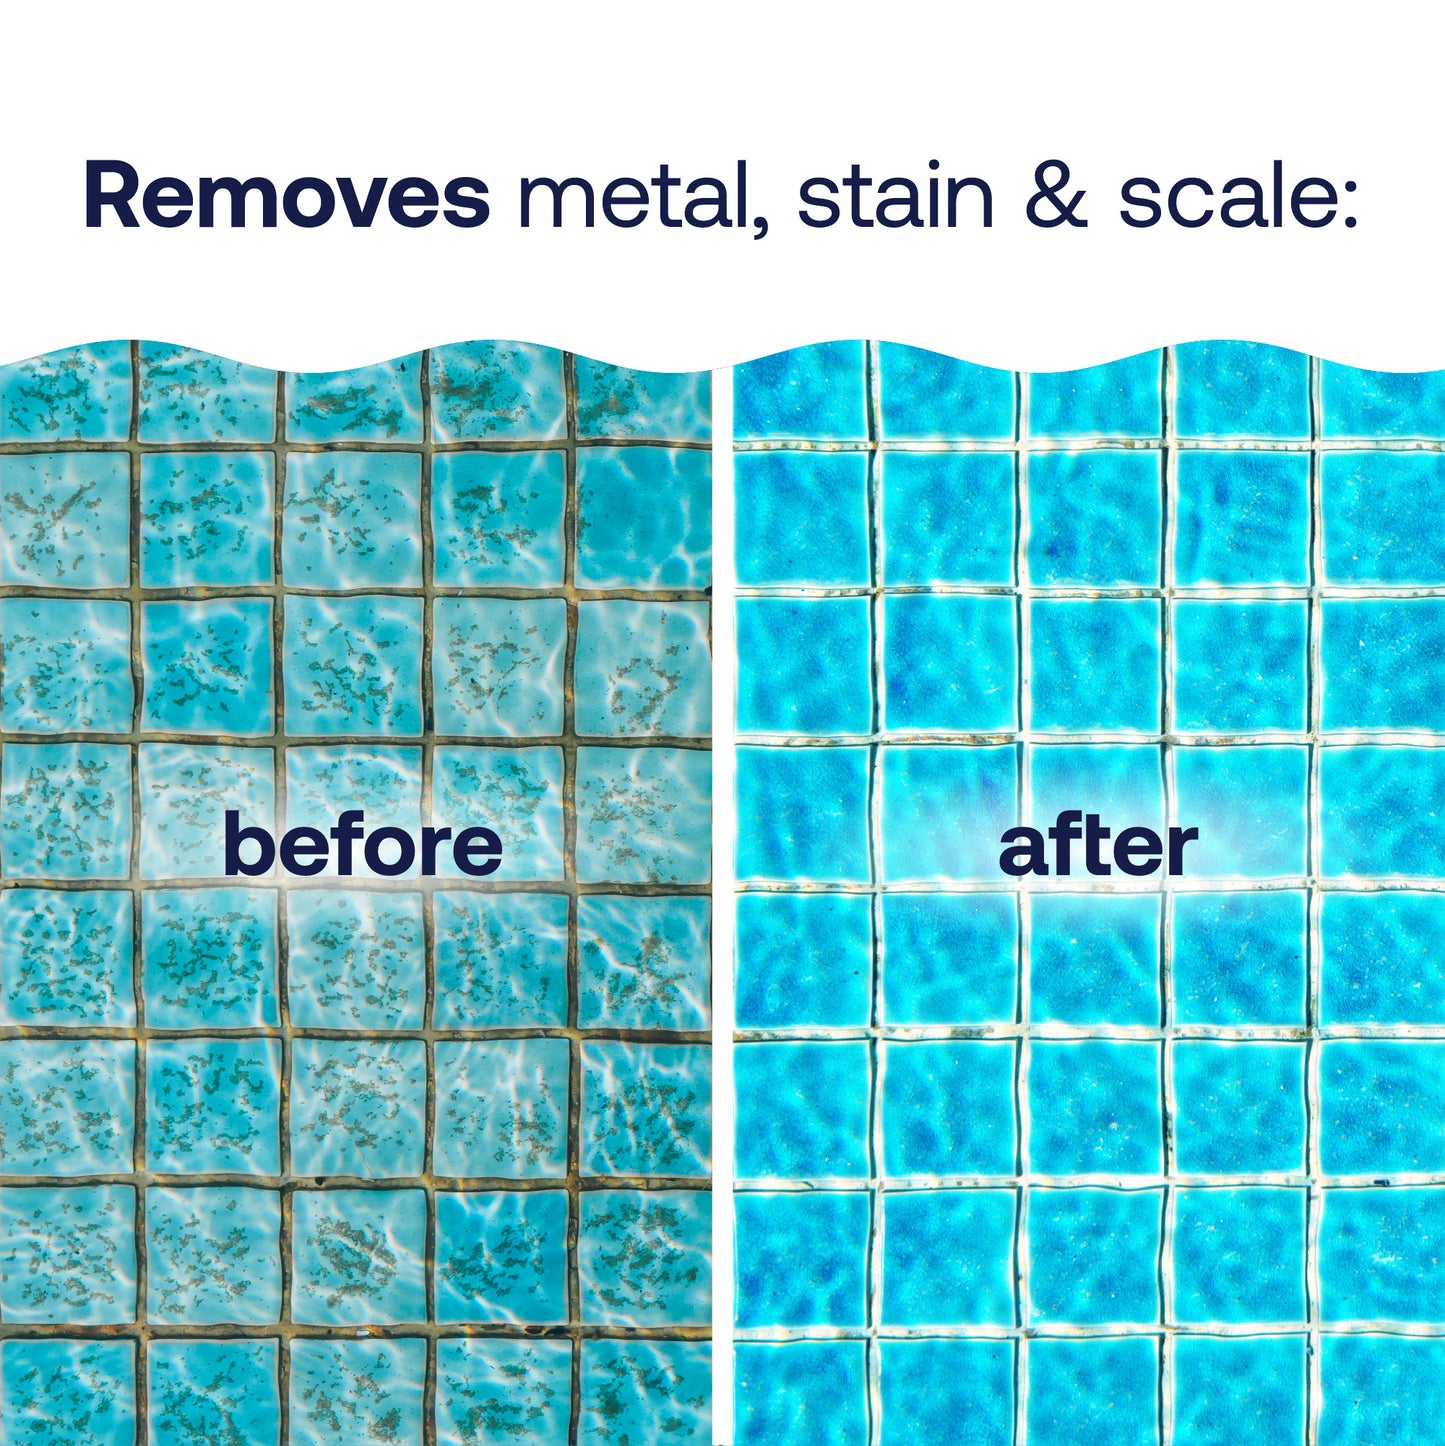 HTH™ Pool Care Metal, Stain & Scale Control: Pool Metal Remover